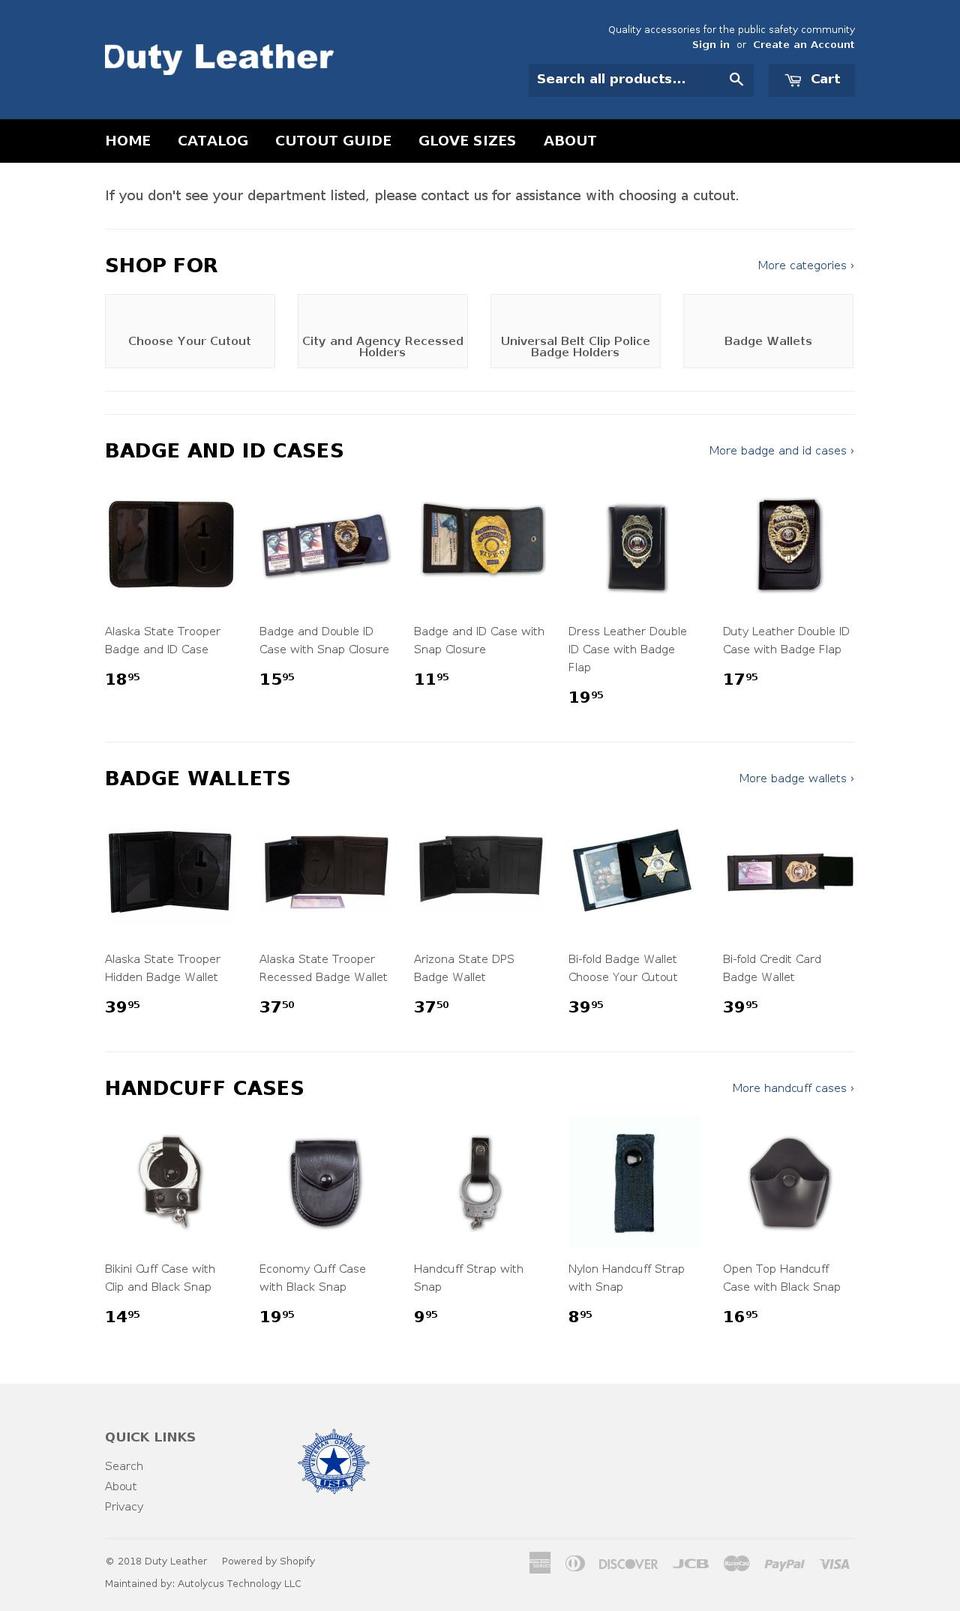 Leather Shopify theme site example dutyleather.com